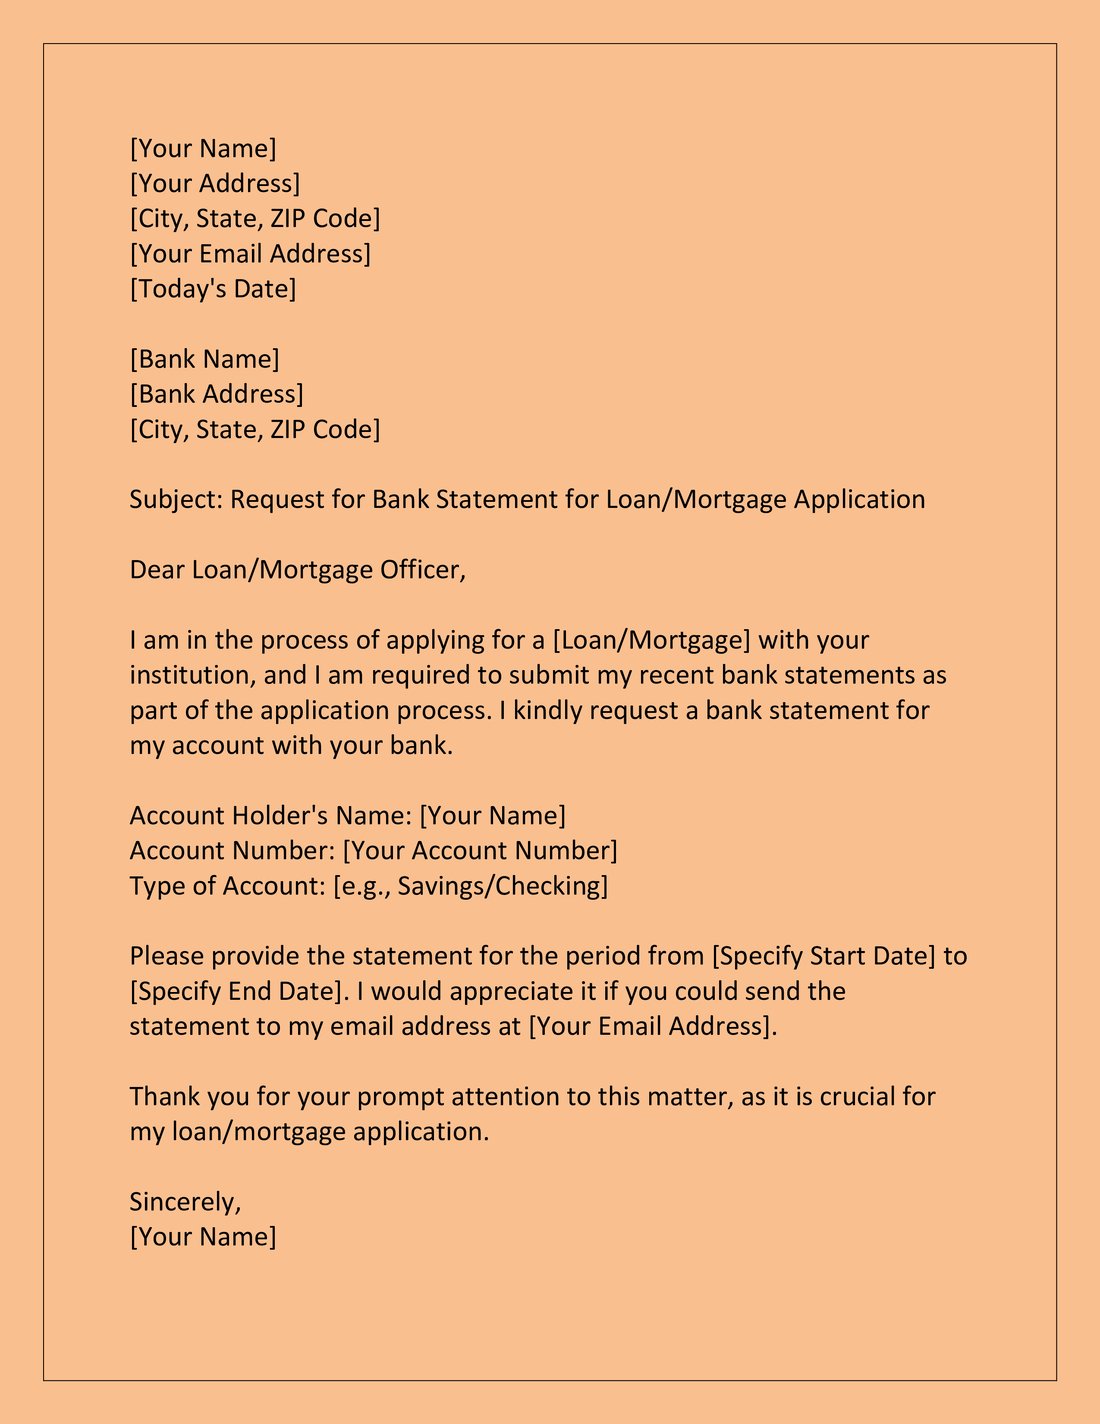 Bank Statement Request Letter for Mortgage or Loan Application